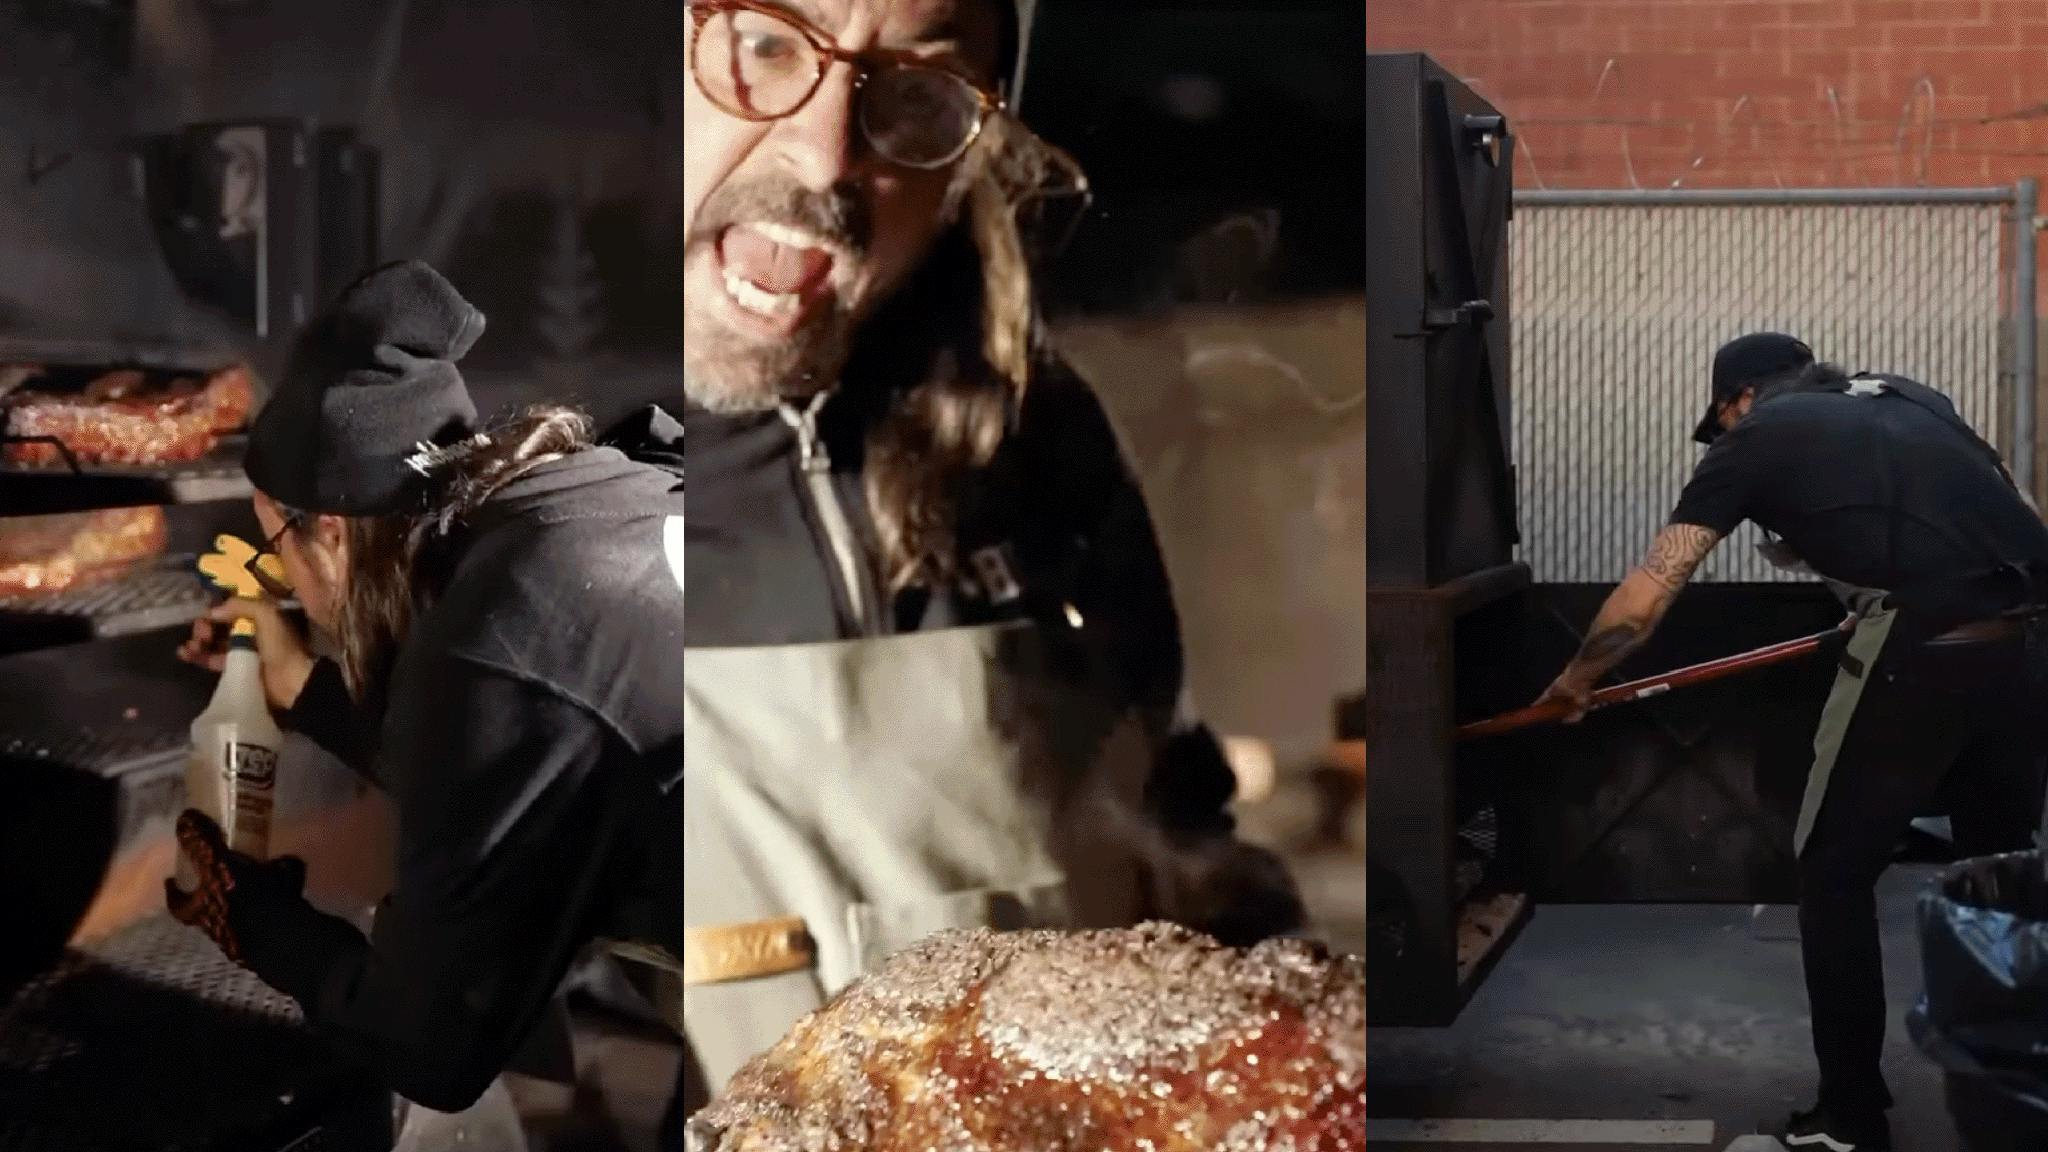 See Dave Grohl yet again helping to feed homeless people